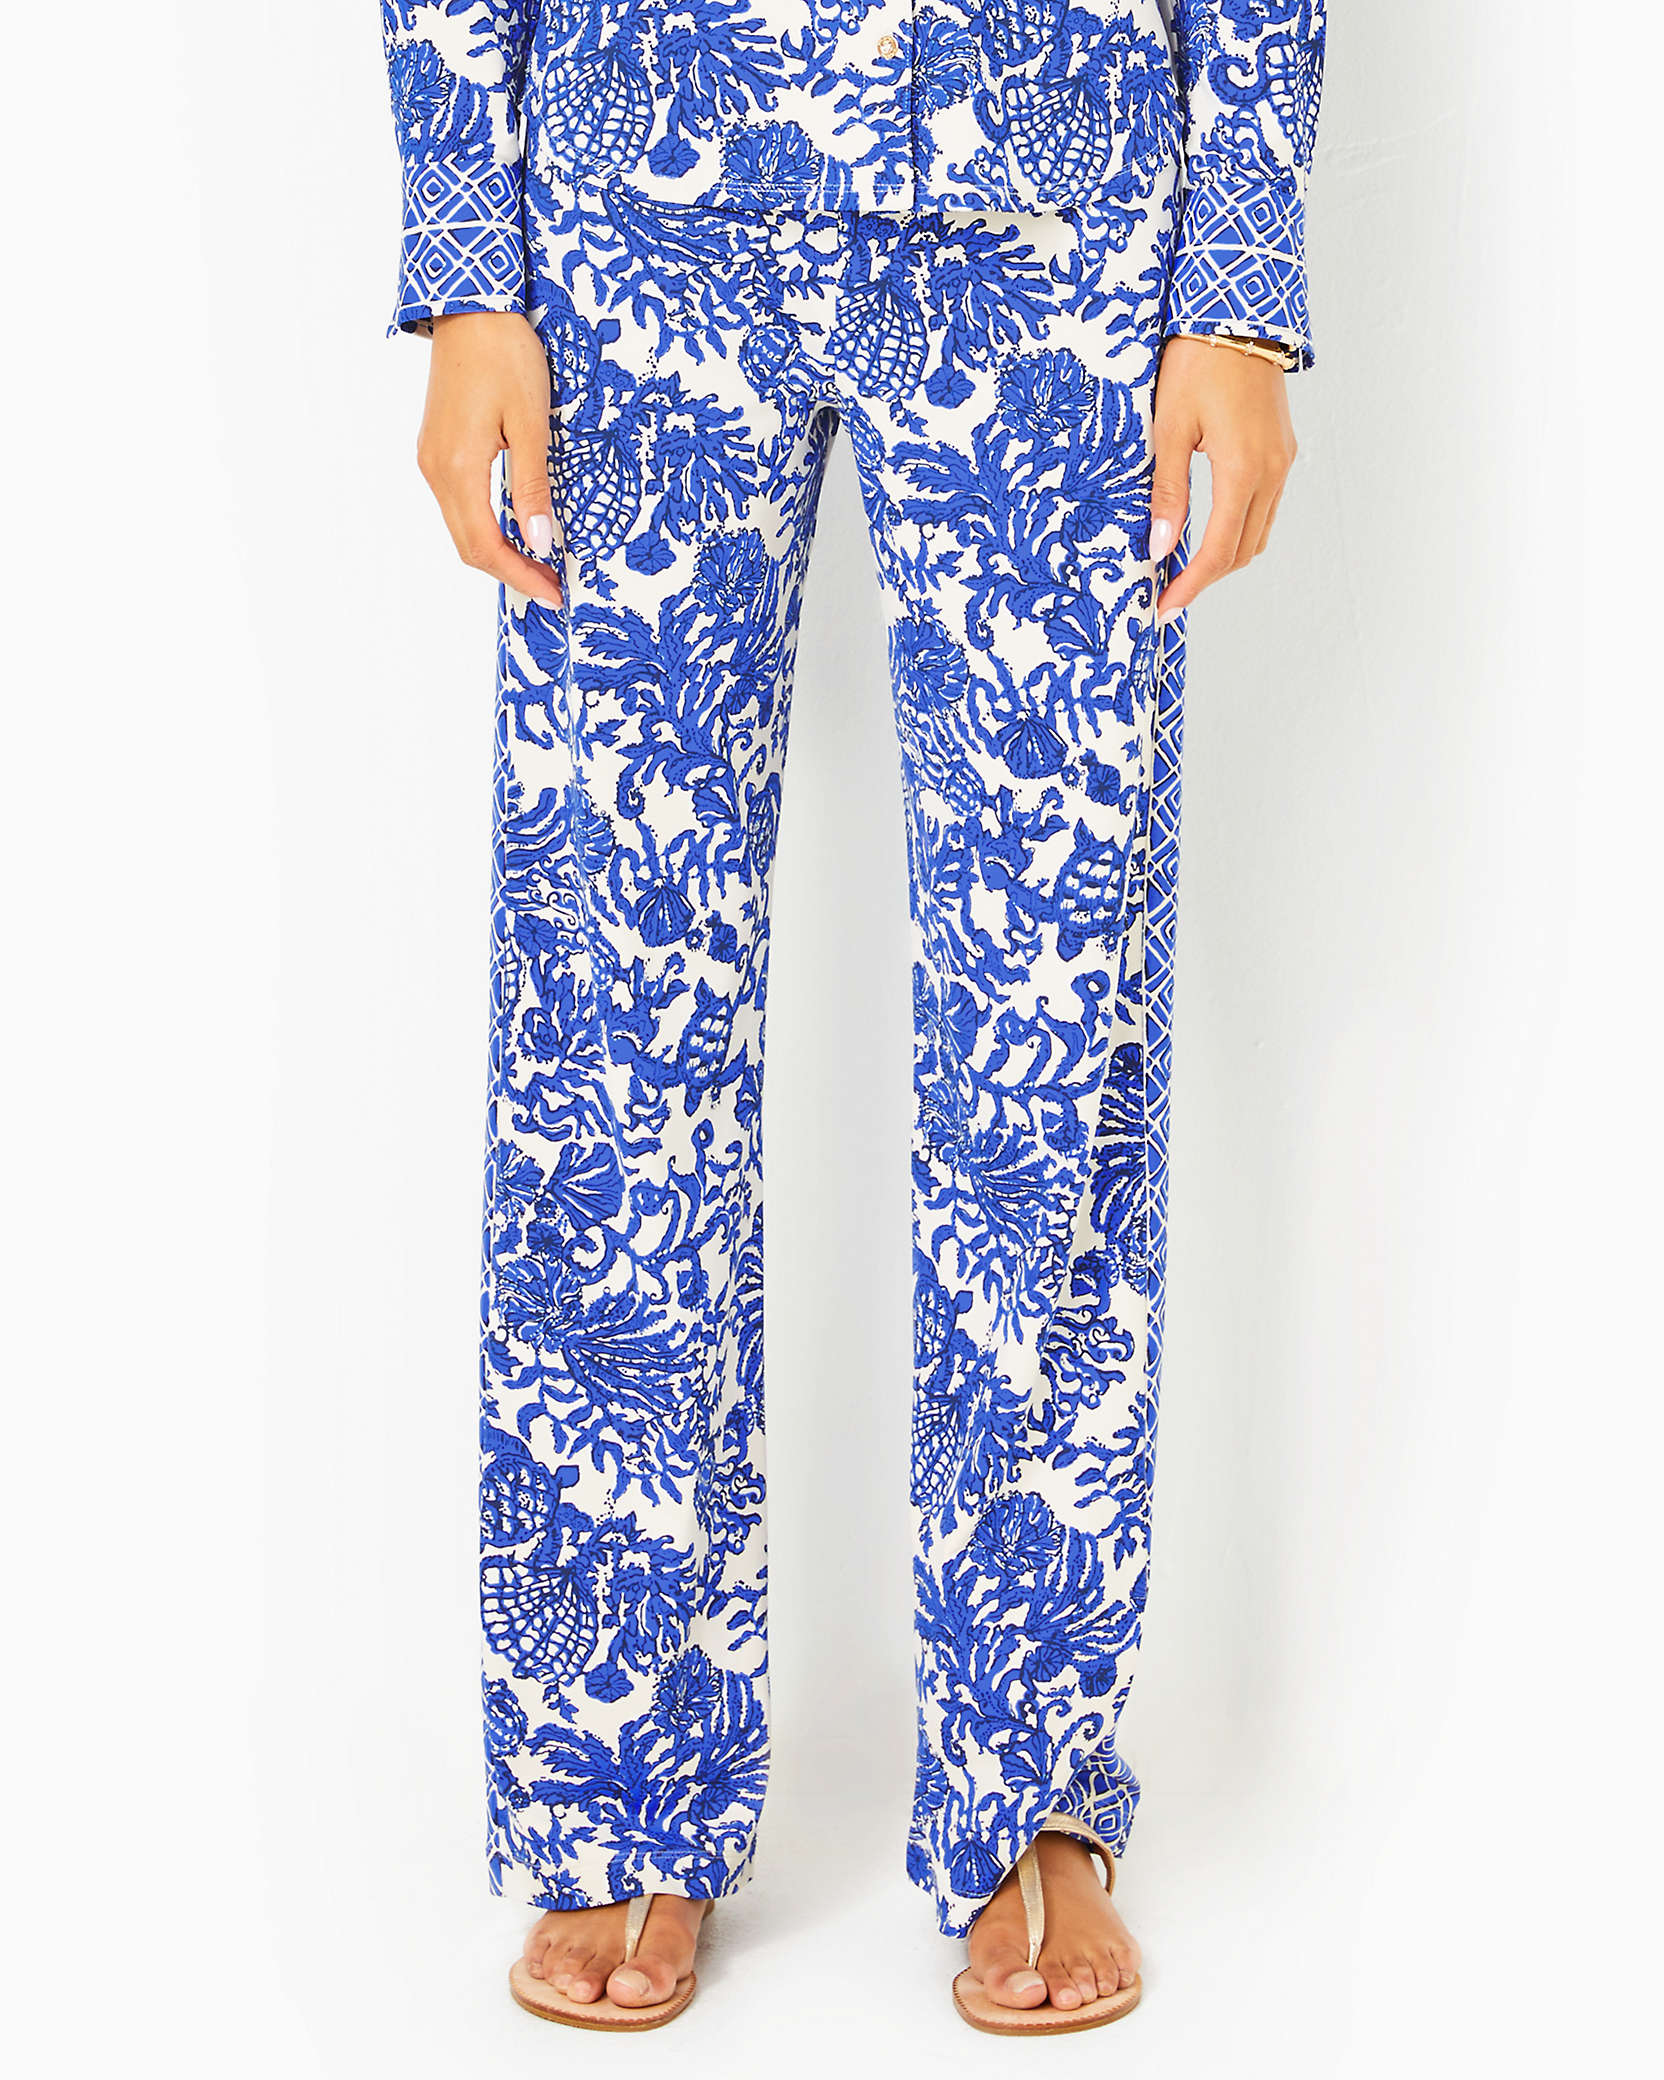 Shop Lilly Pulitzer Upf 50+ 32" Grenada Knit Pant In Deeper Coconut Ride With Me Engineered Chillylilly